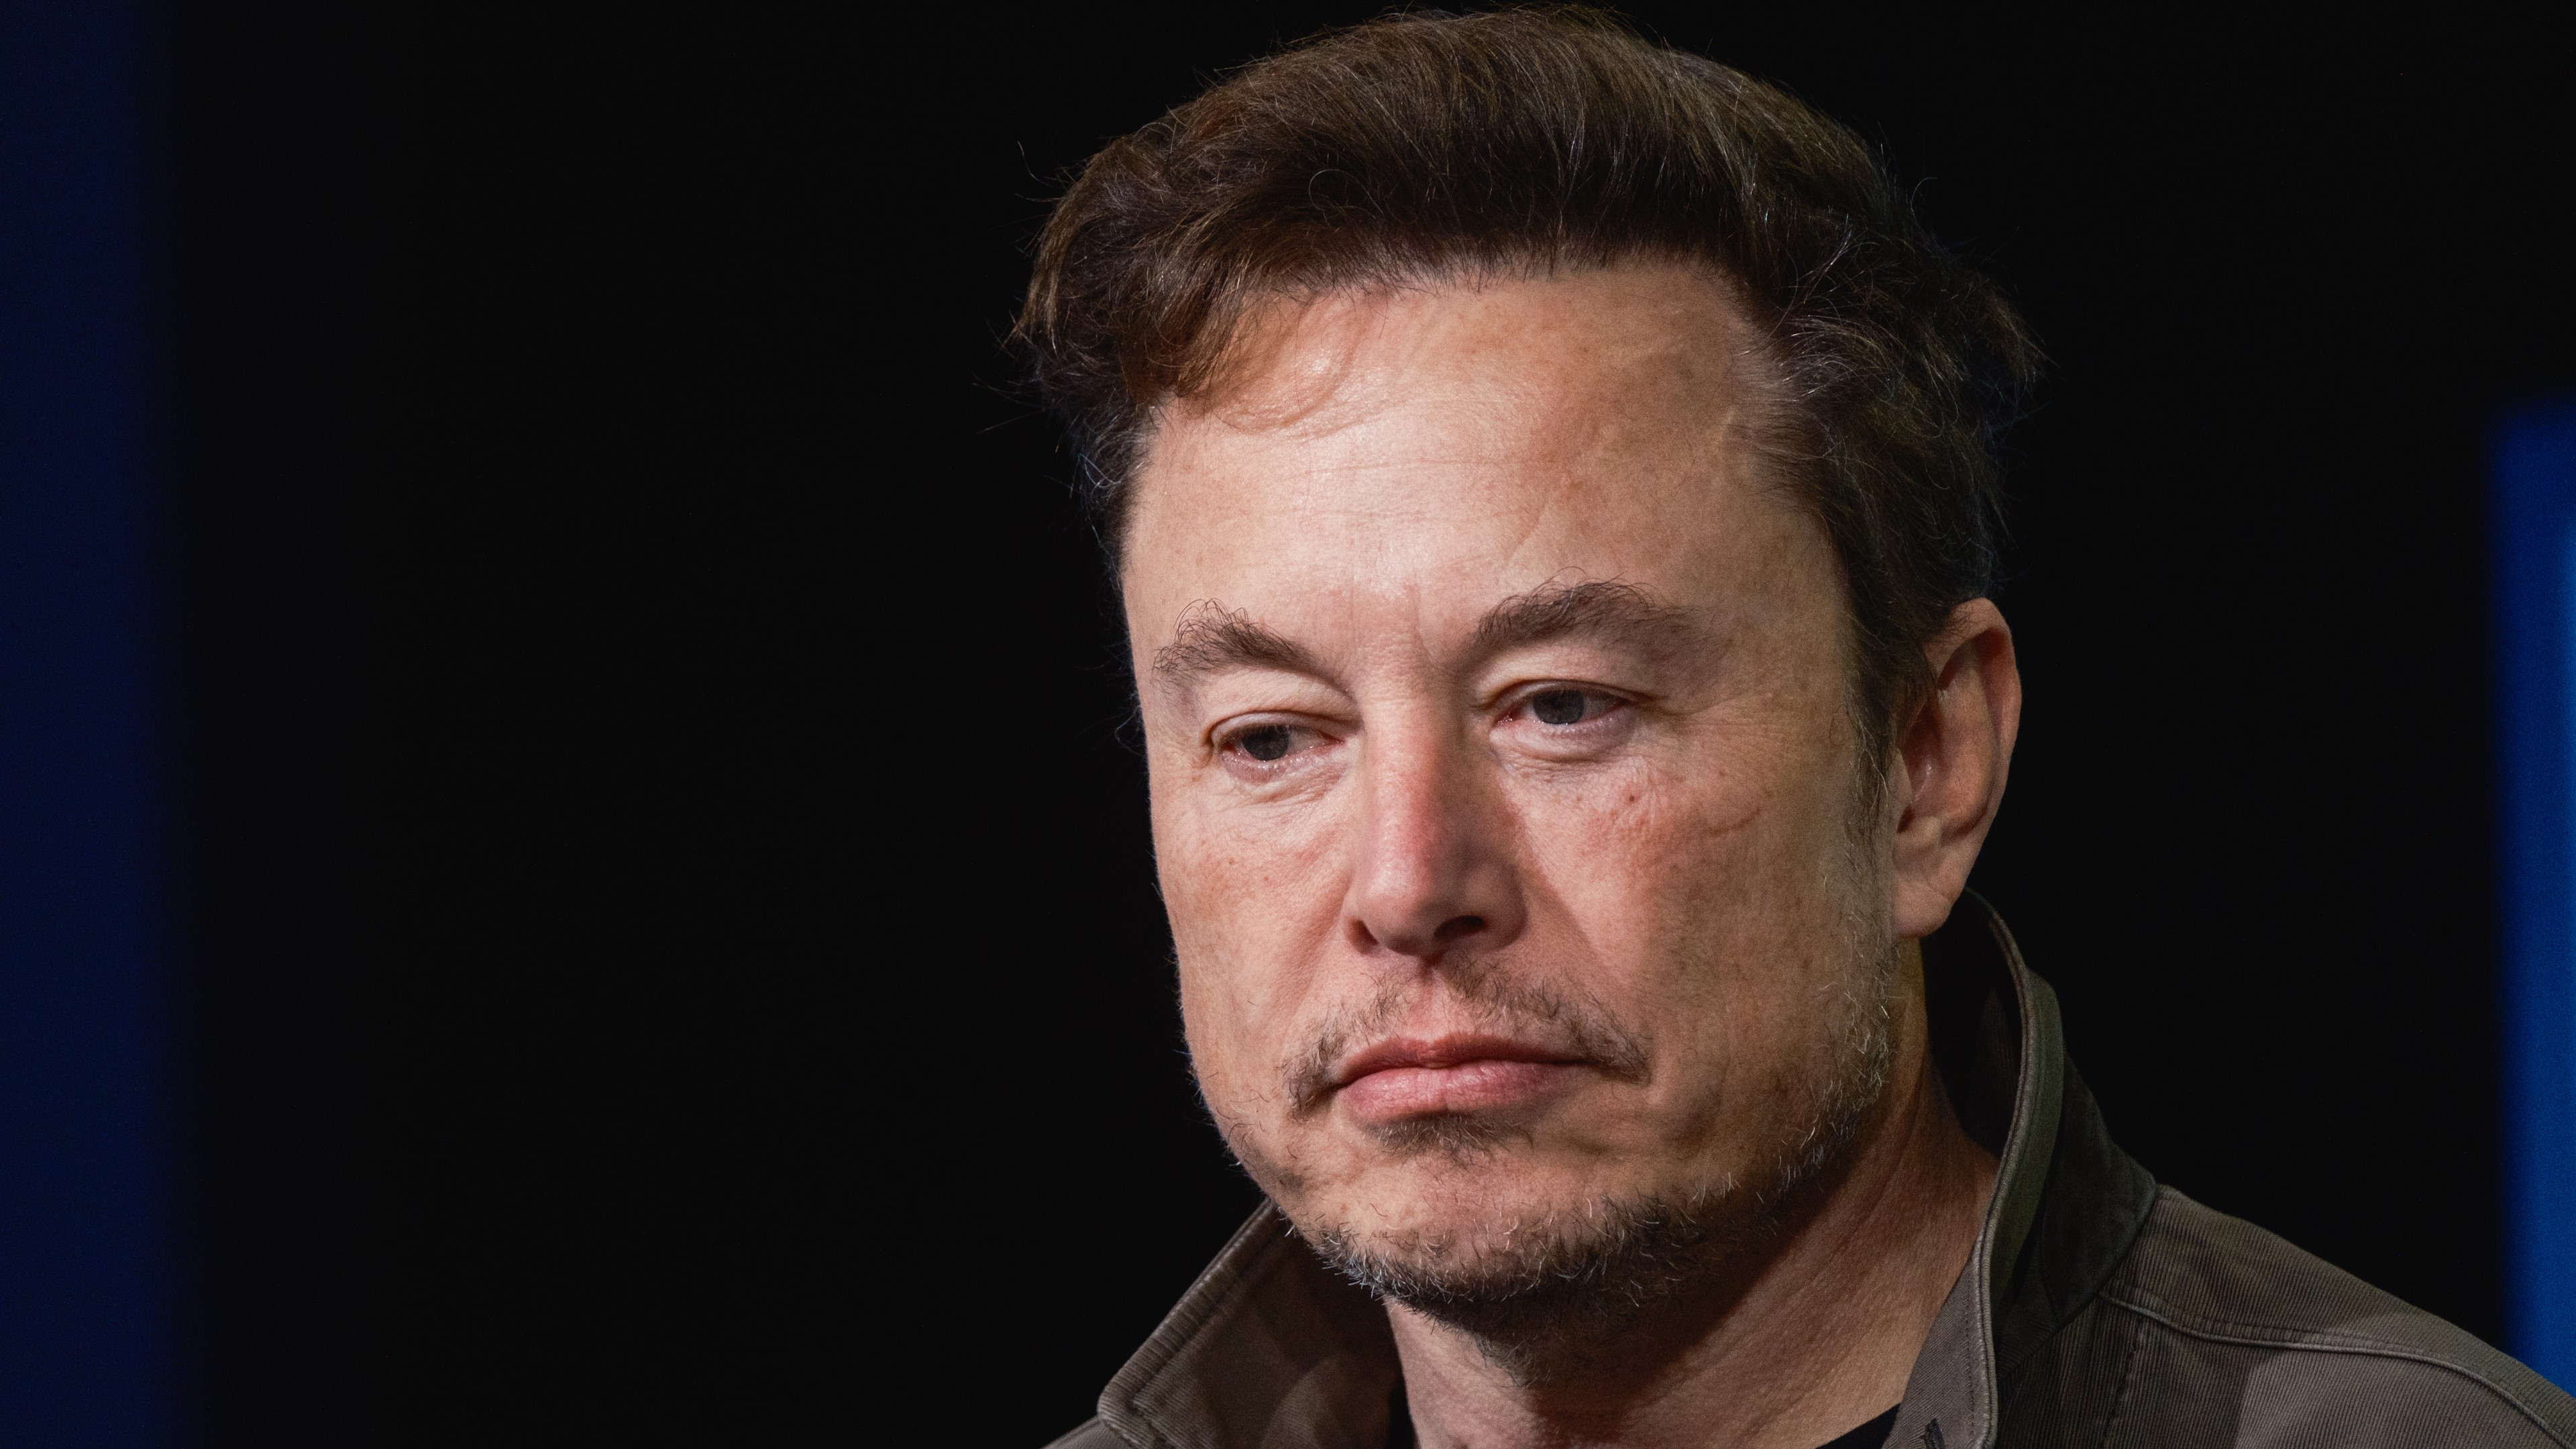  Elon Musk appearance at Valorant Champions tournament met with boos, crowd chanting 'Bring back Twitter' 